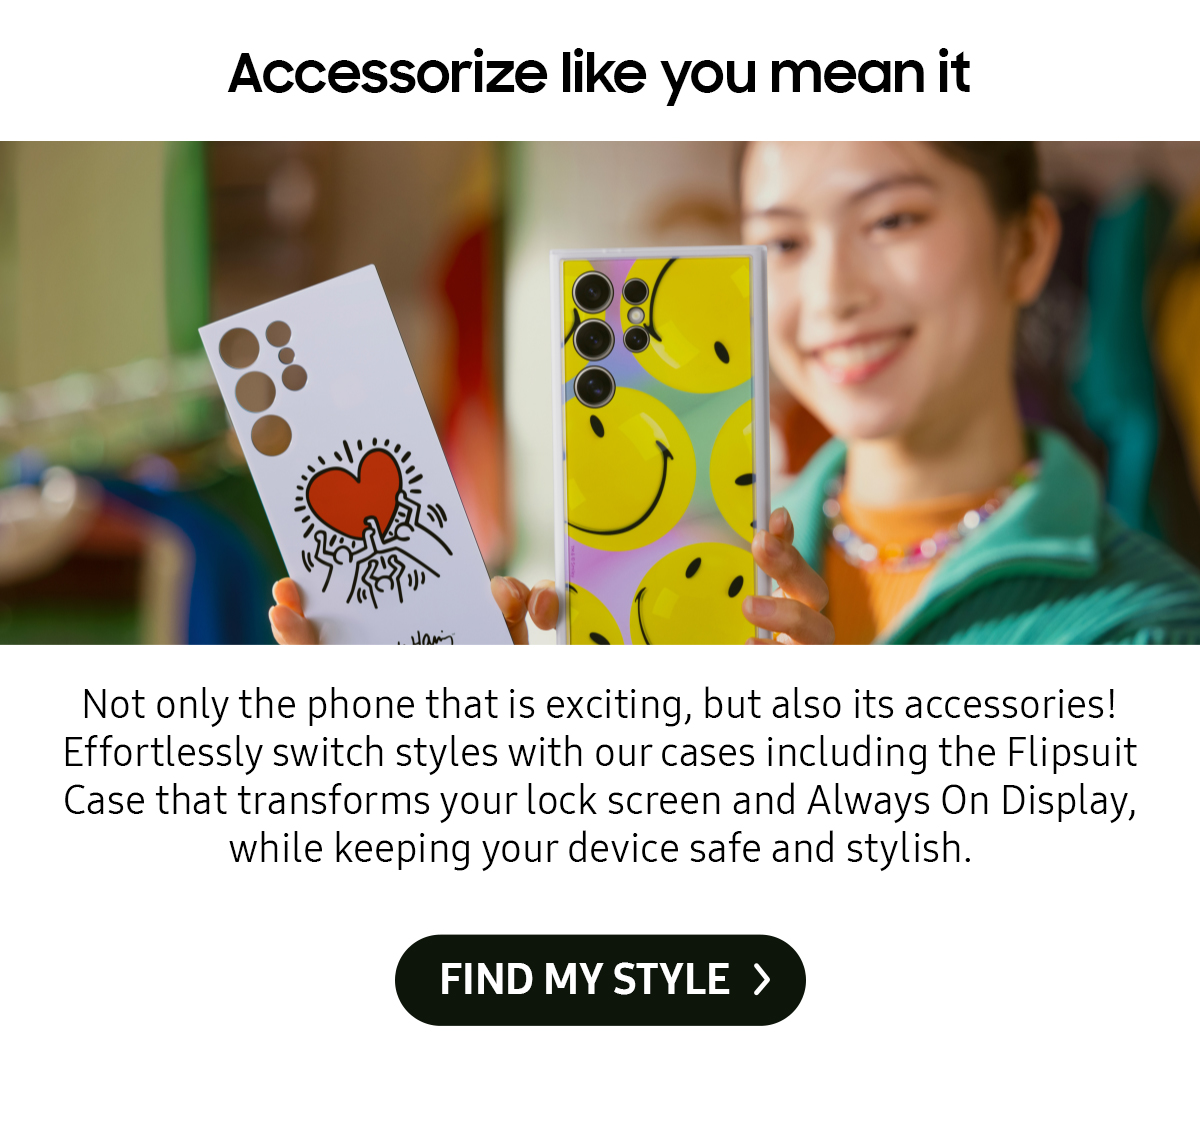 Accessorize like you mean it | Not only the phone that is exciting, but also its accessories! Effortlessly switch styles with our cases including the Flipsuit Case that transforms your lock screen and Always On Display, while keeping your device safe and stylish.